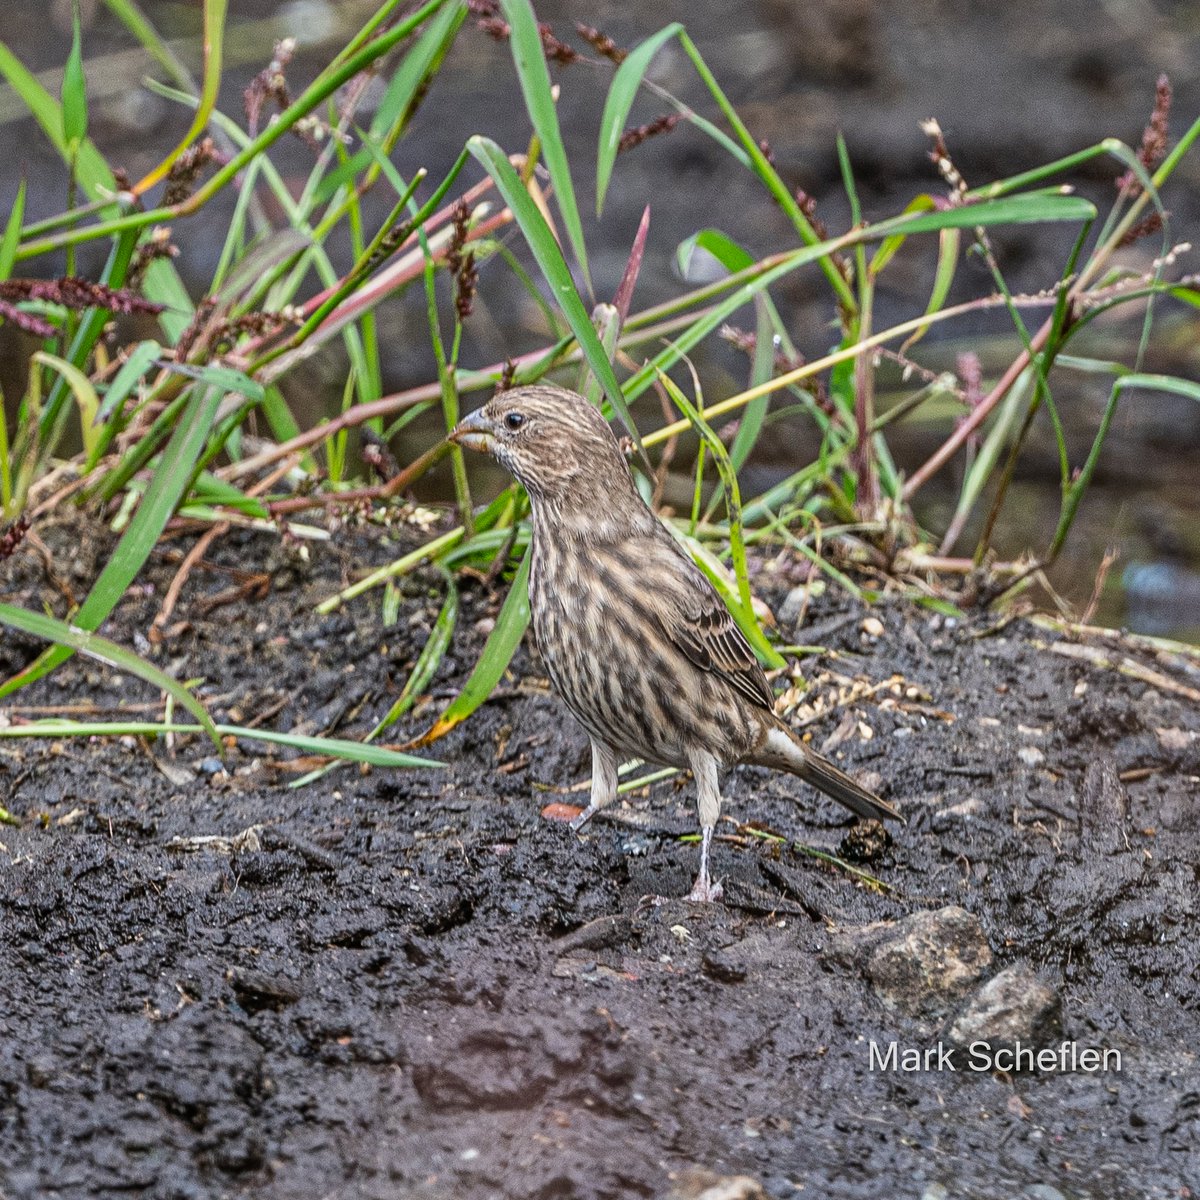 House Finch, at the waterhole, Compost area, Central Park, NYC @Britnatureguide @BirdCentralPark #birdwatching #birdphotography #BirdTwitter #birdmigration #birds #nikonphotography #Nikon #nikonlens #NaturePhotography #naturetherapy #bcp